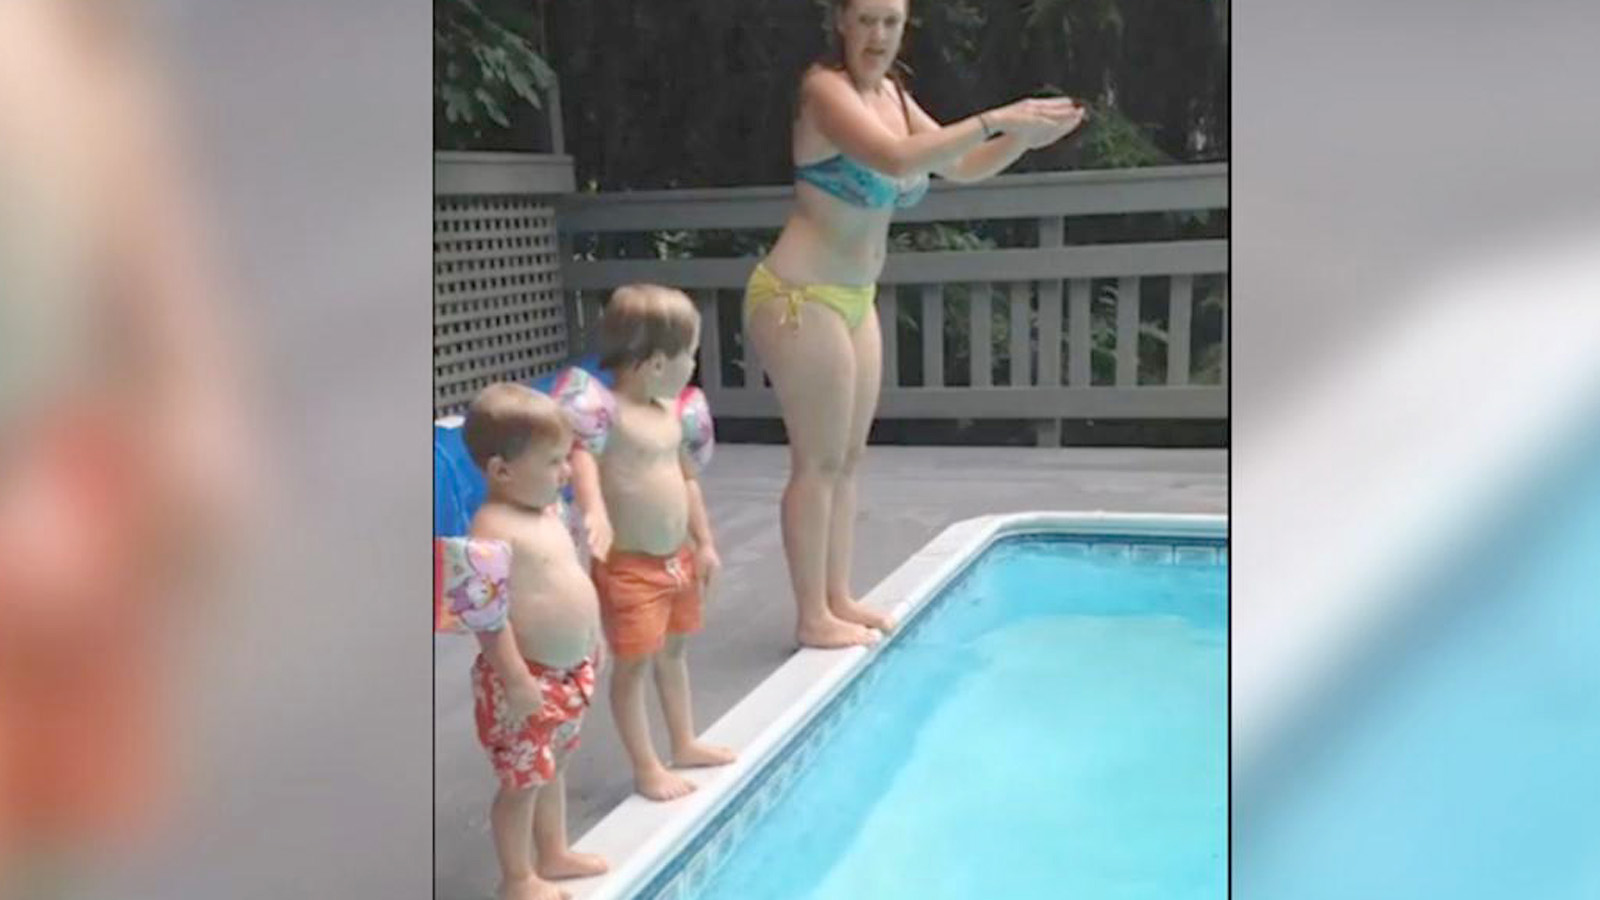 PHOTO: Corina Casanova of North Carolina, shared a video of her son trying to dive into a pool onto Facebook.